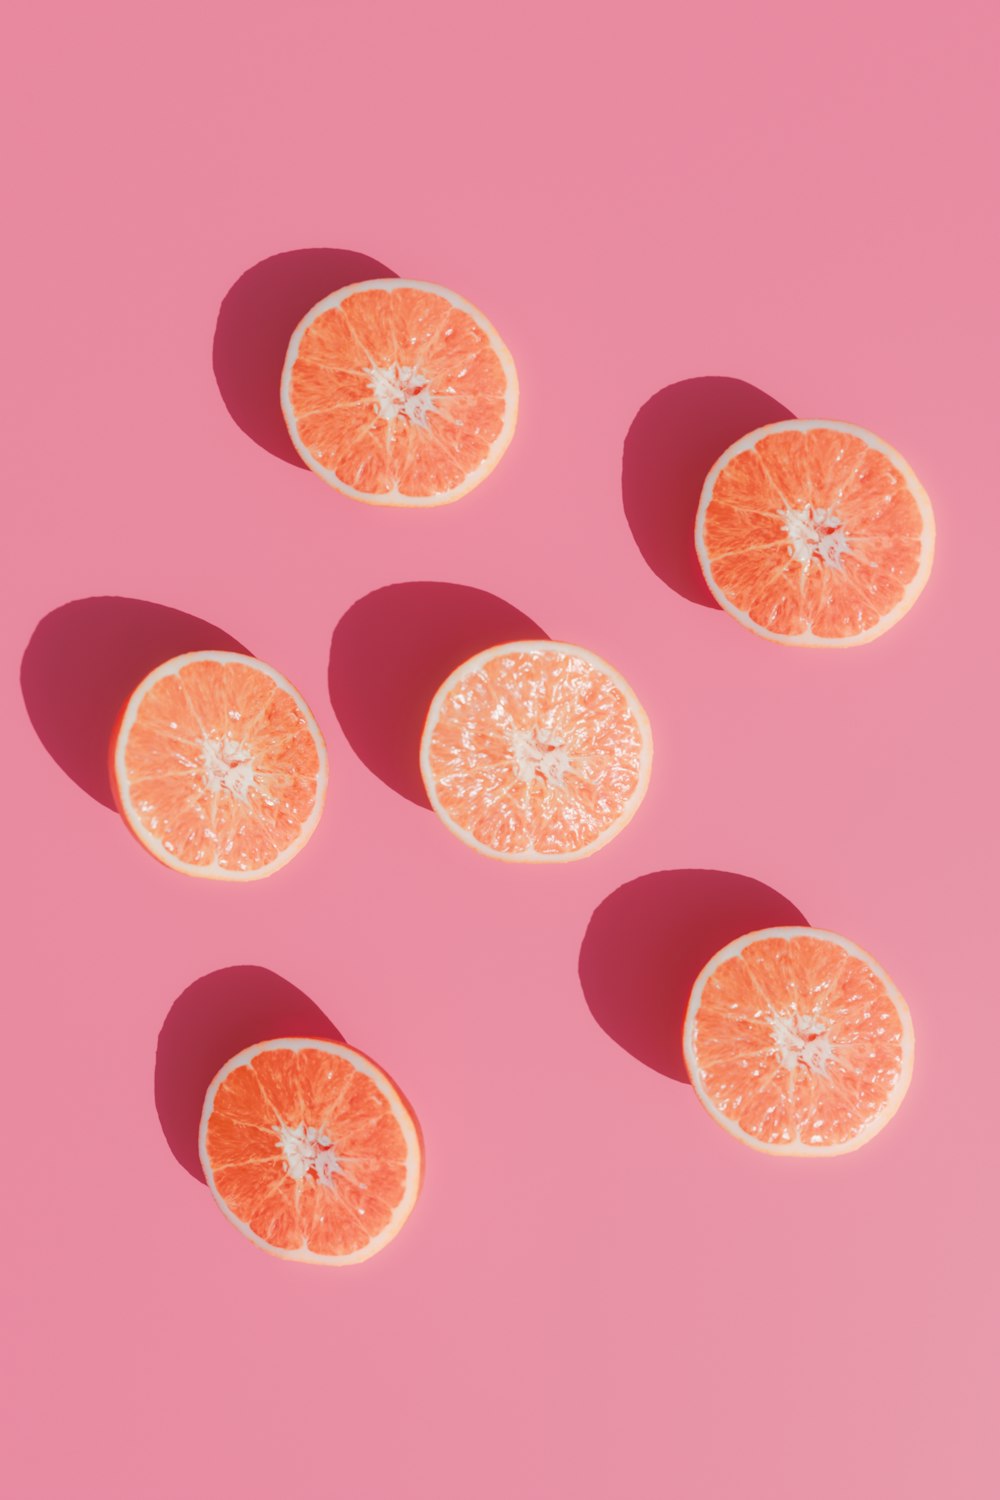 a group of oranges sitting on top of a pink surface